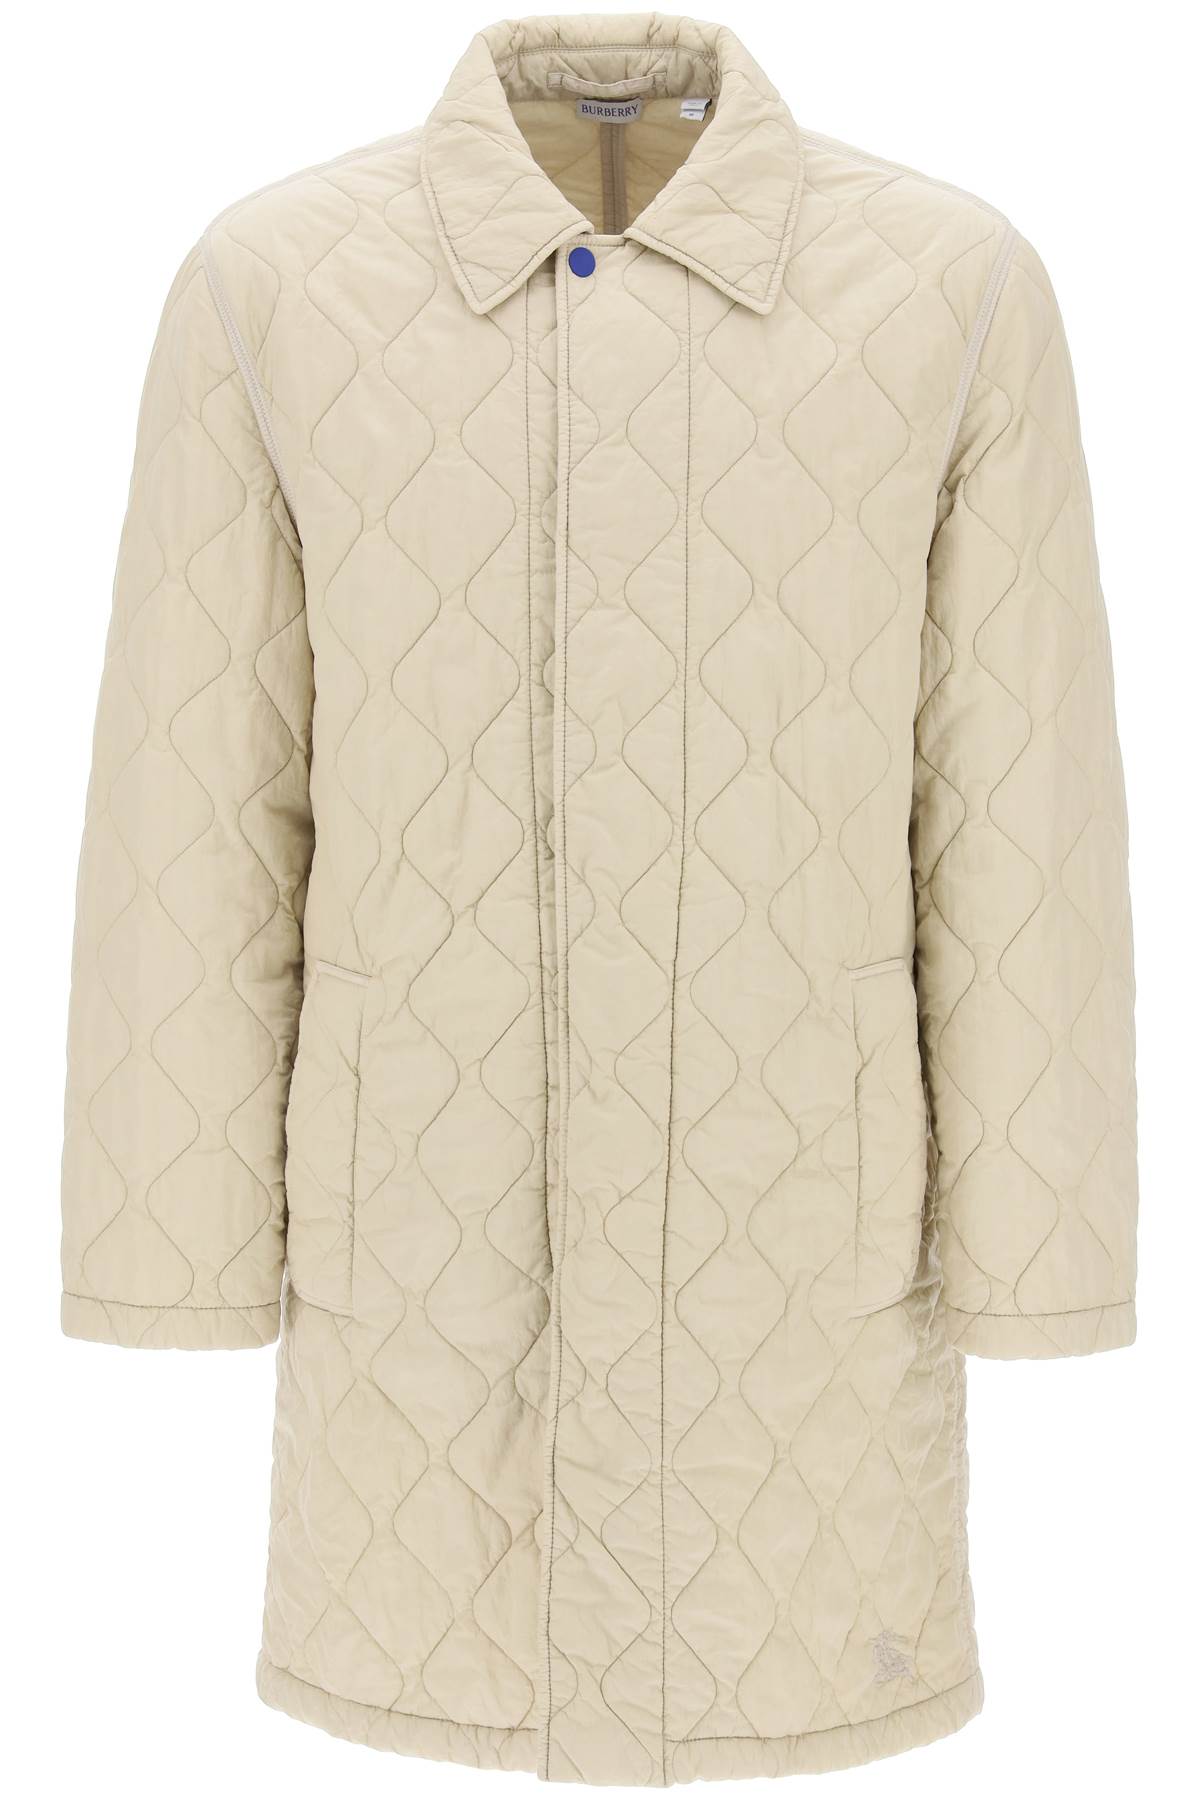 Shop Burberry Crinkled & Quilted Nylon Midi Car Jacket For Men In Grey